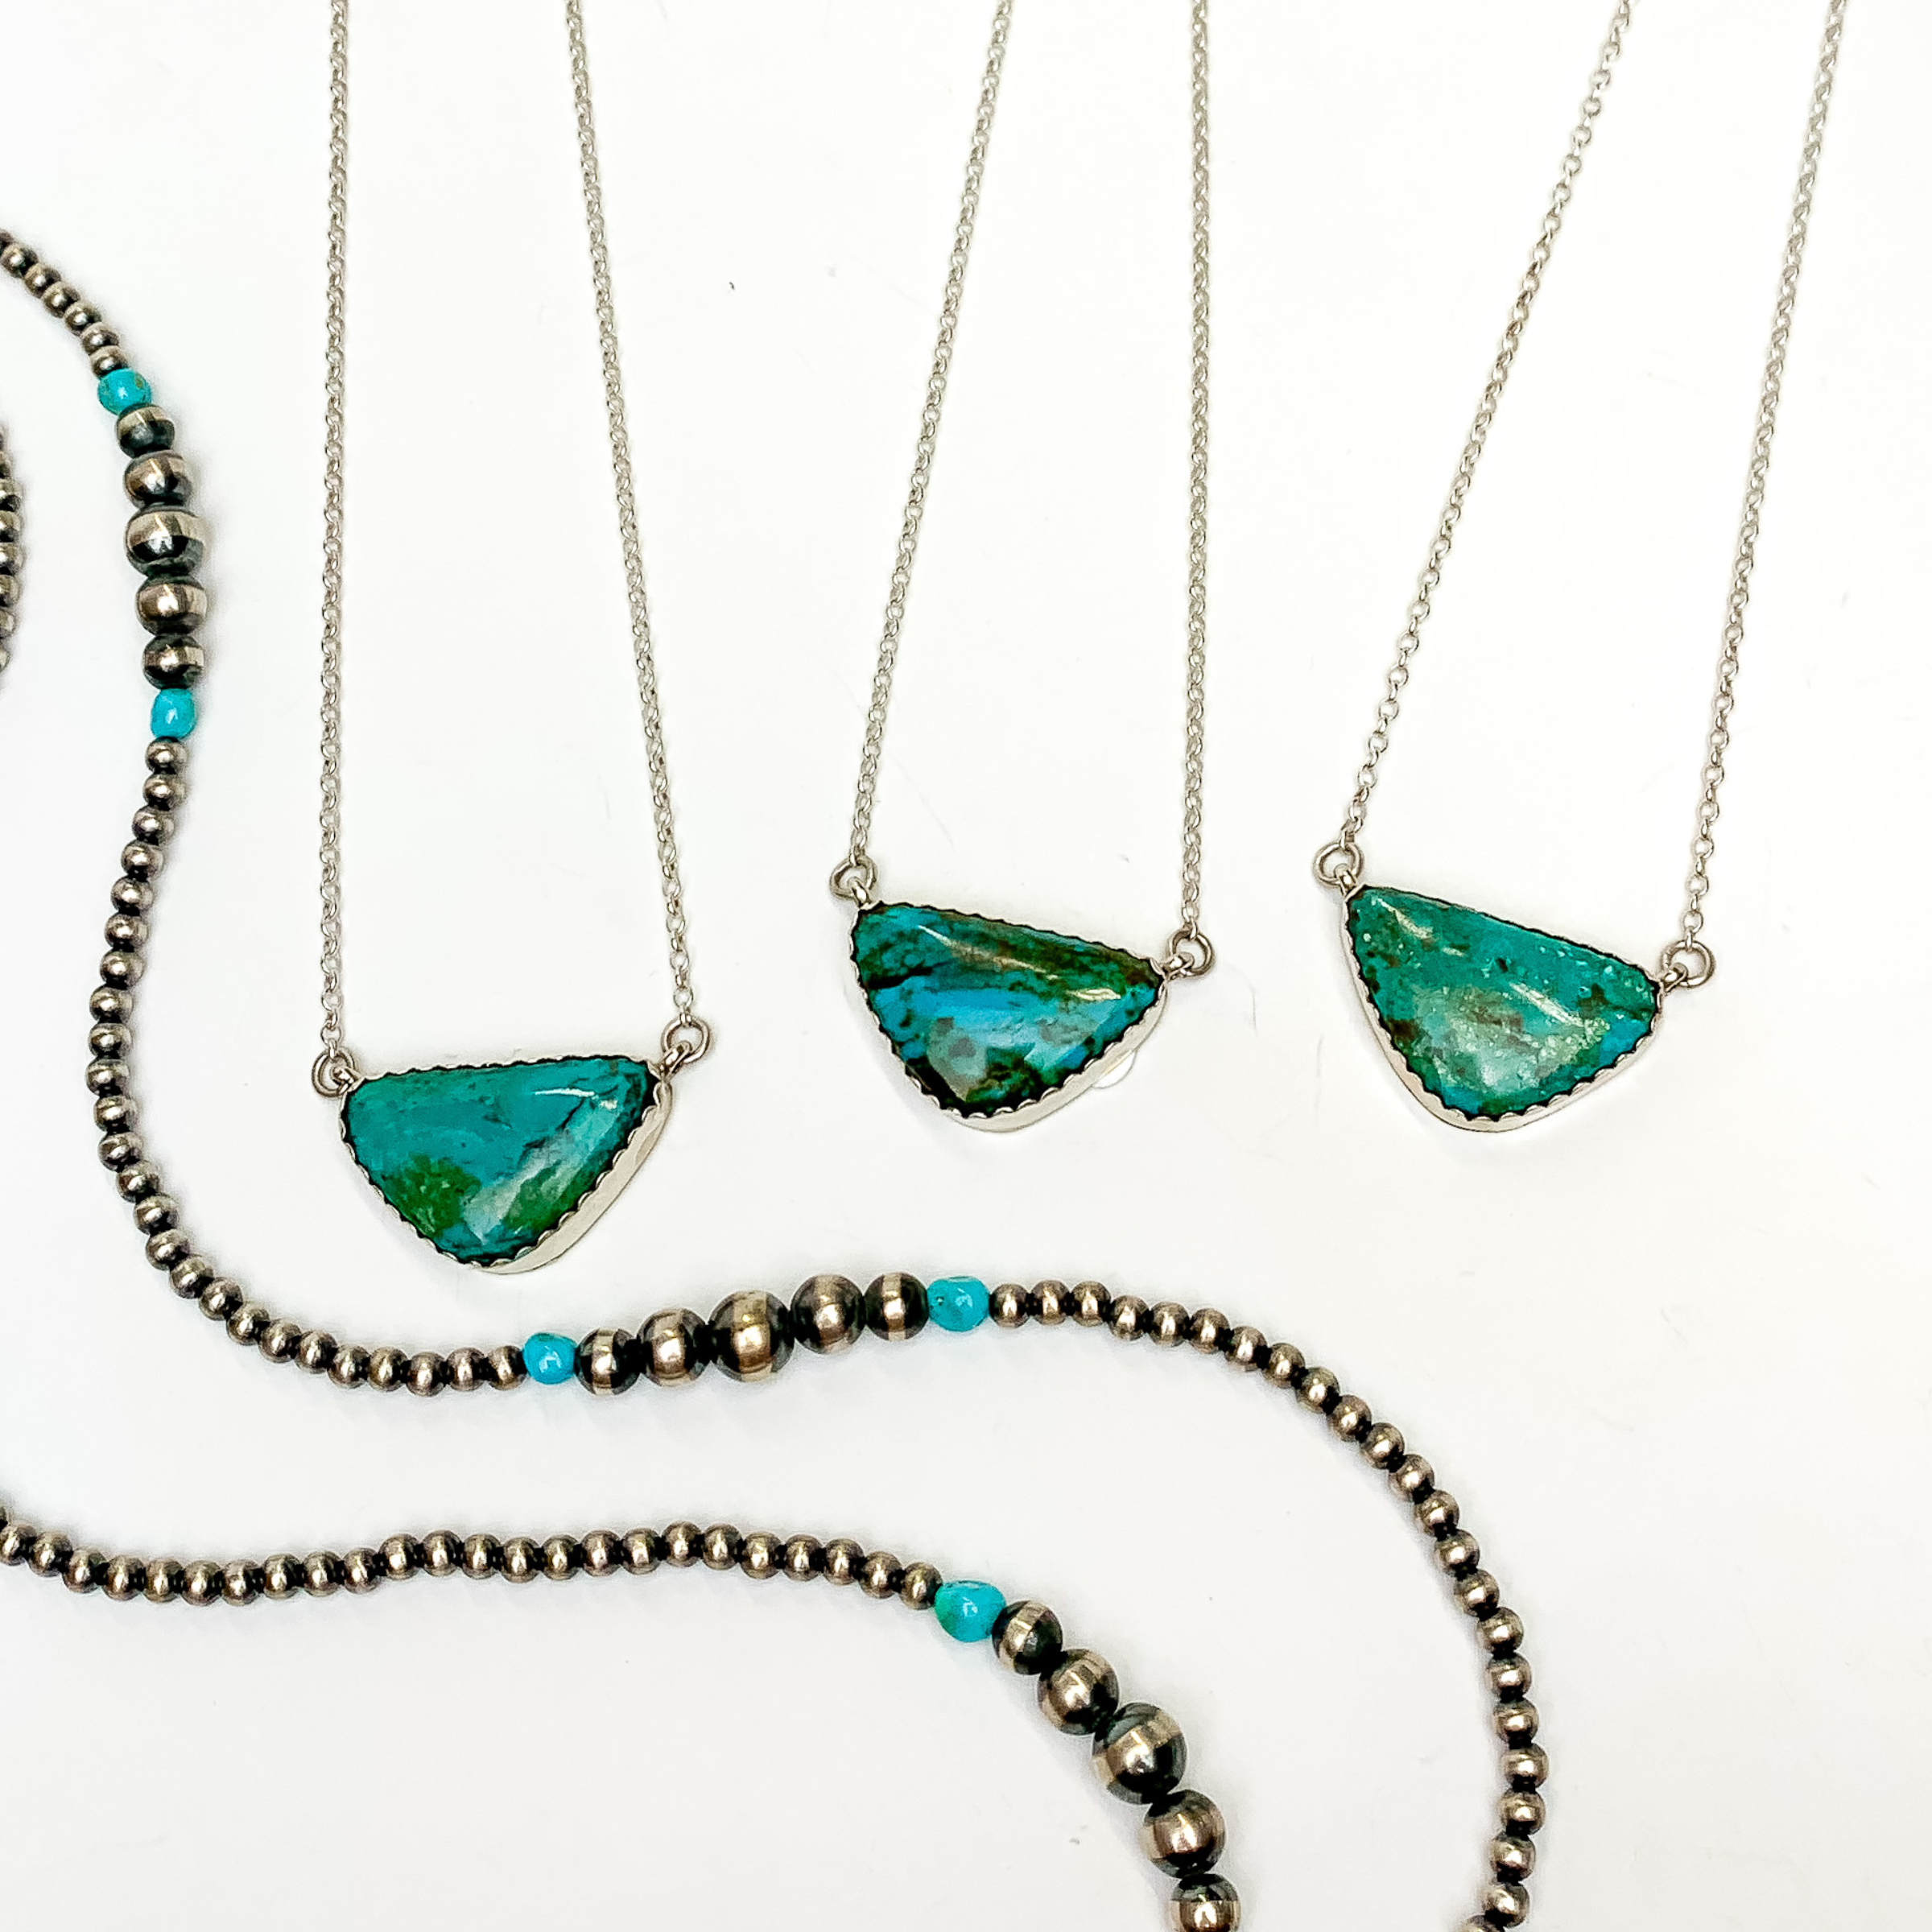 Three silver chain necklaces with triangle stone pendant in turquoise. These necklaces are pictured on a white background with silver beads.